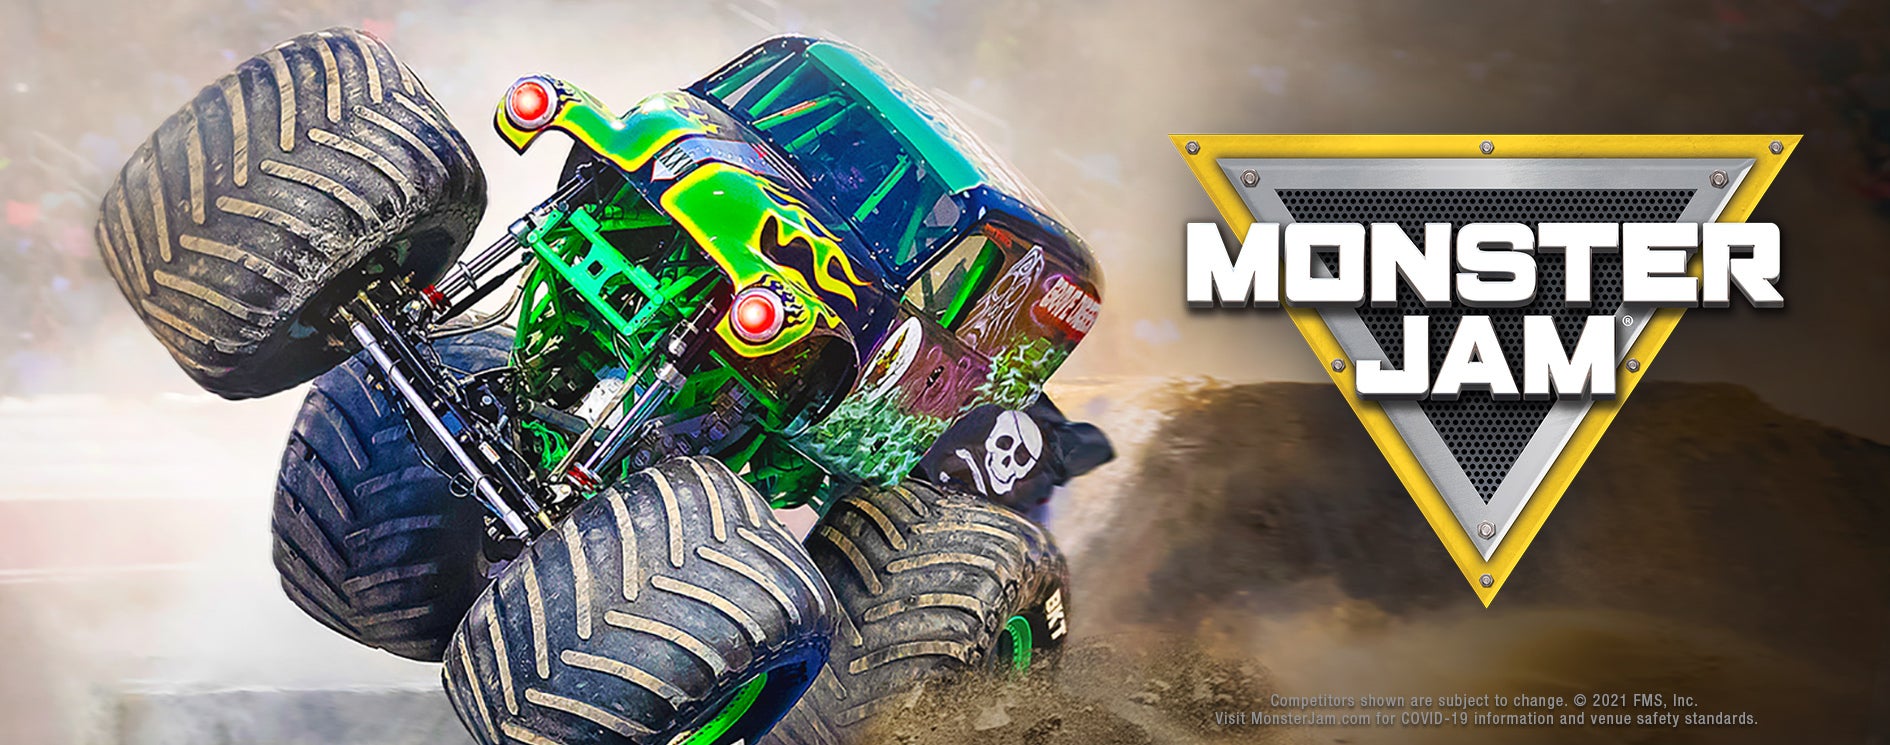 MONSTER JAM® ROARS BACK INTO MINNESOTA AFTER TWO YEAR HIATUS WITH